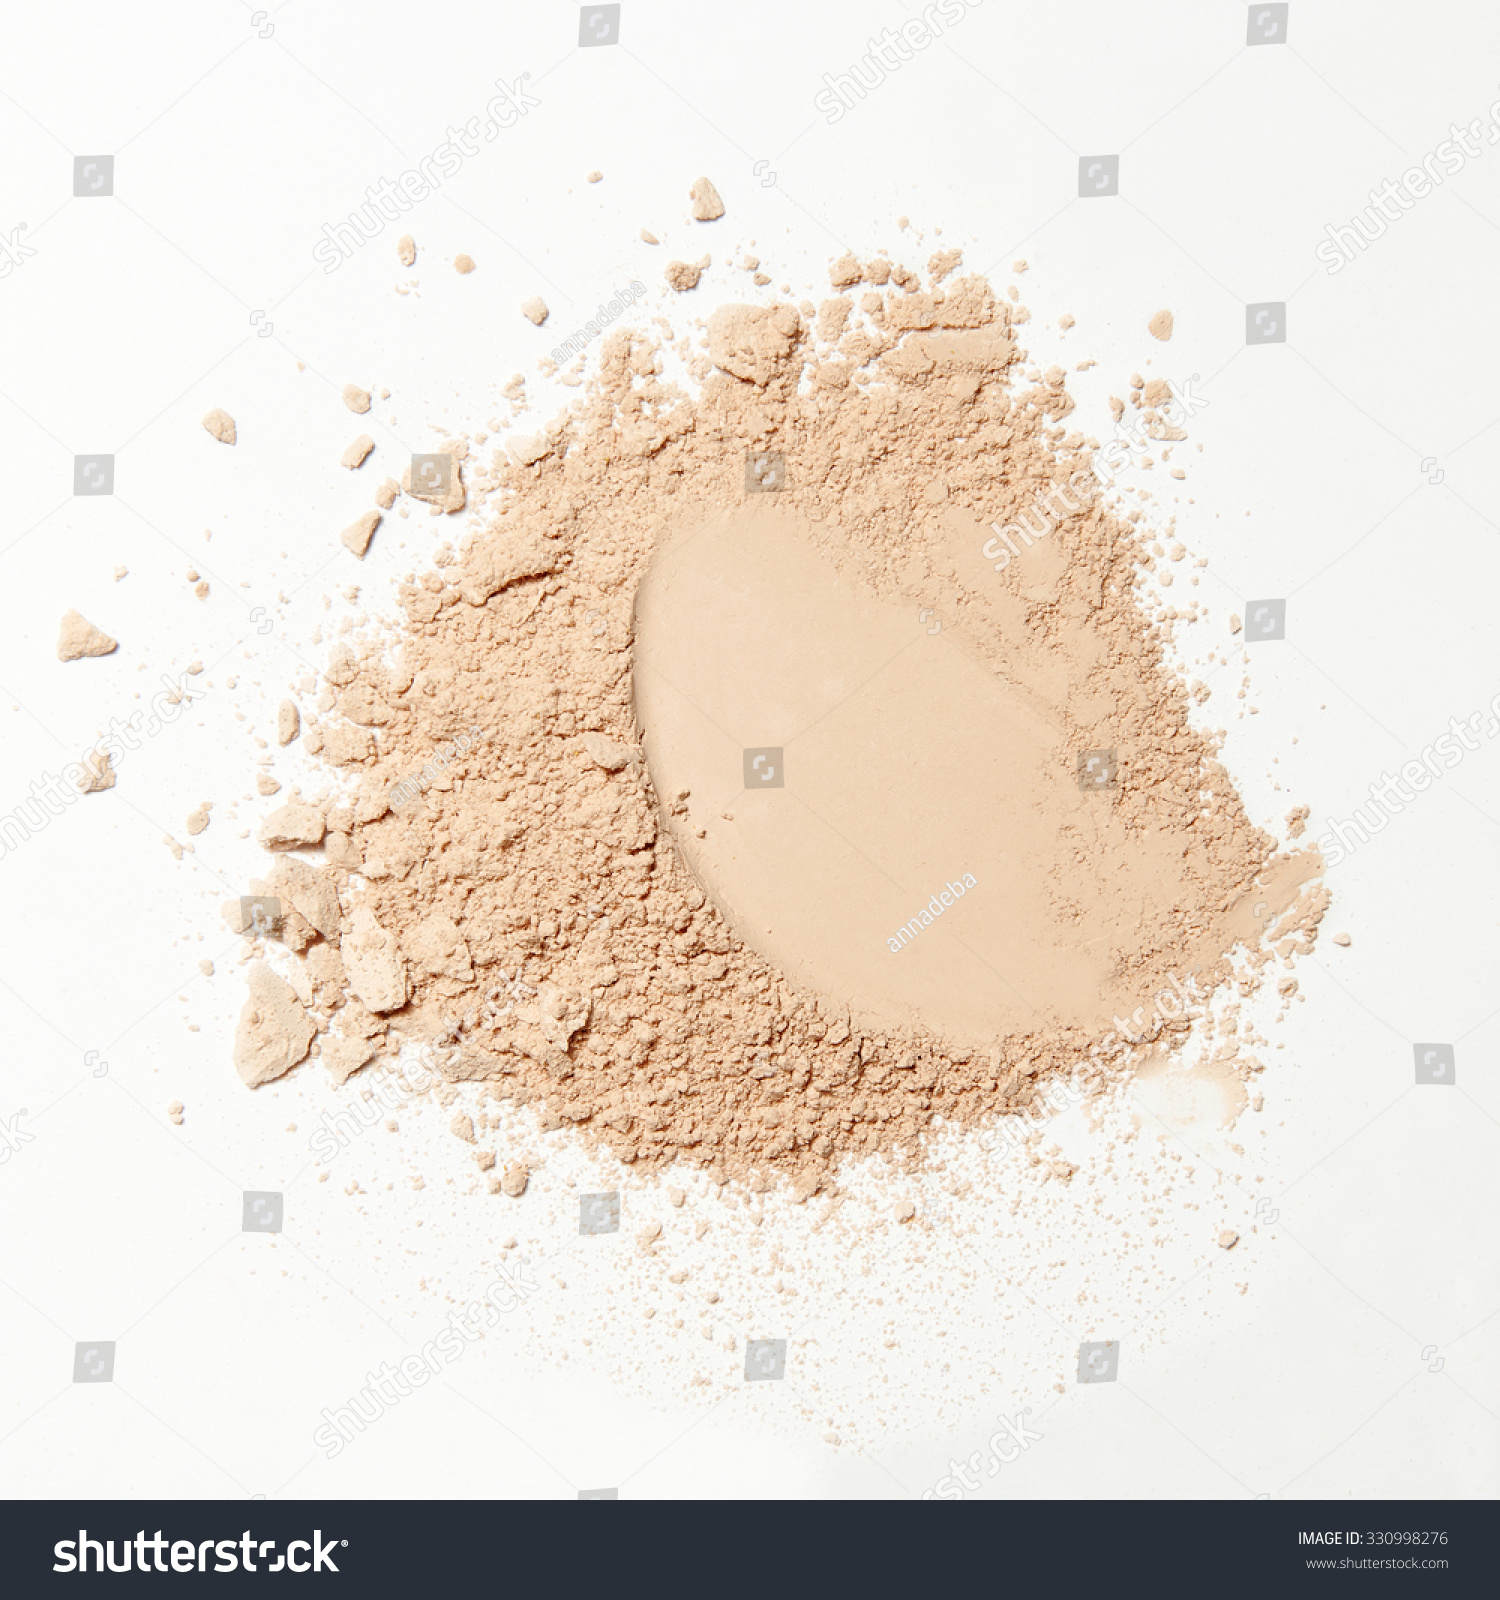 crumbled natural powder make up on white background #330998276